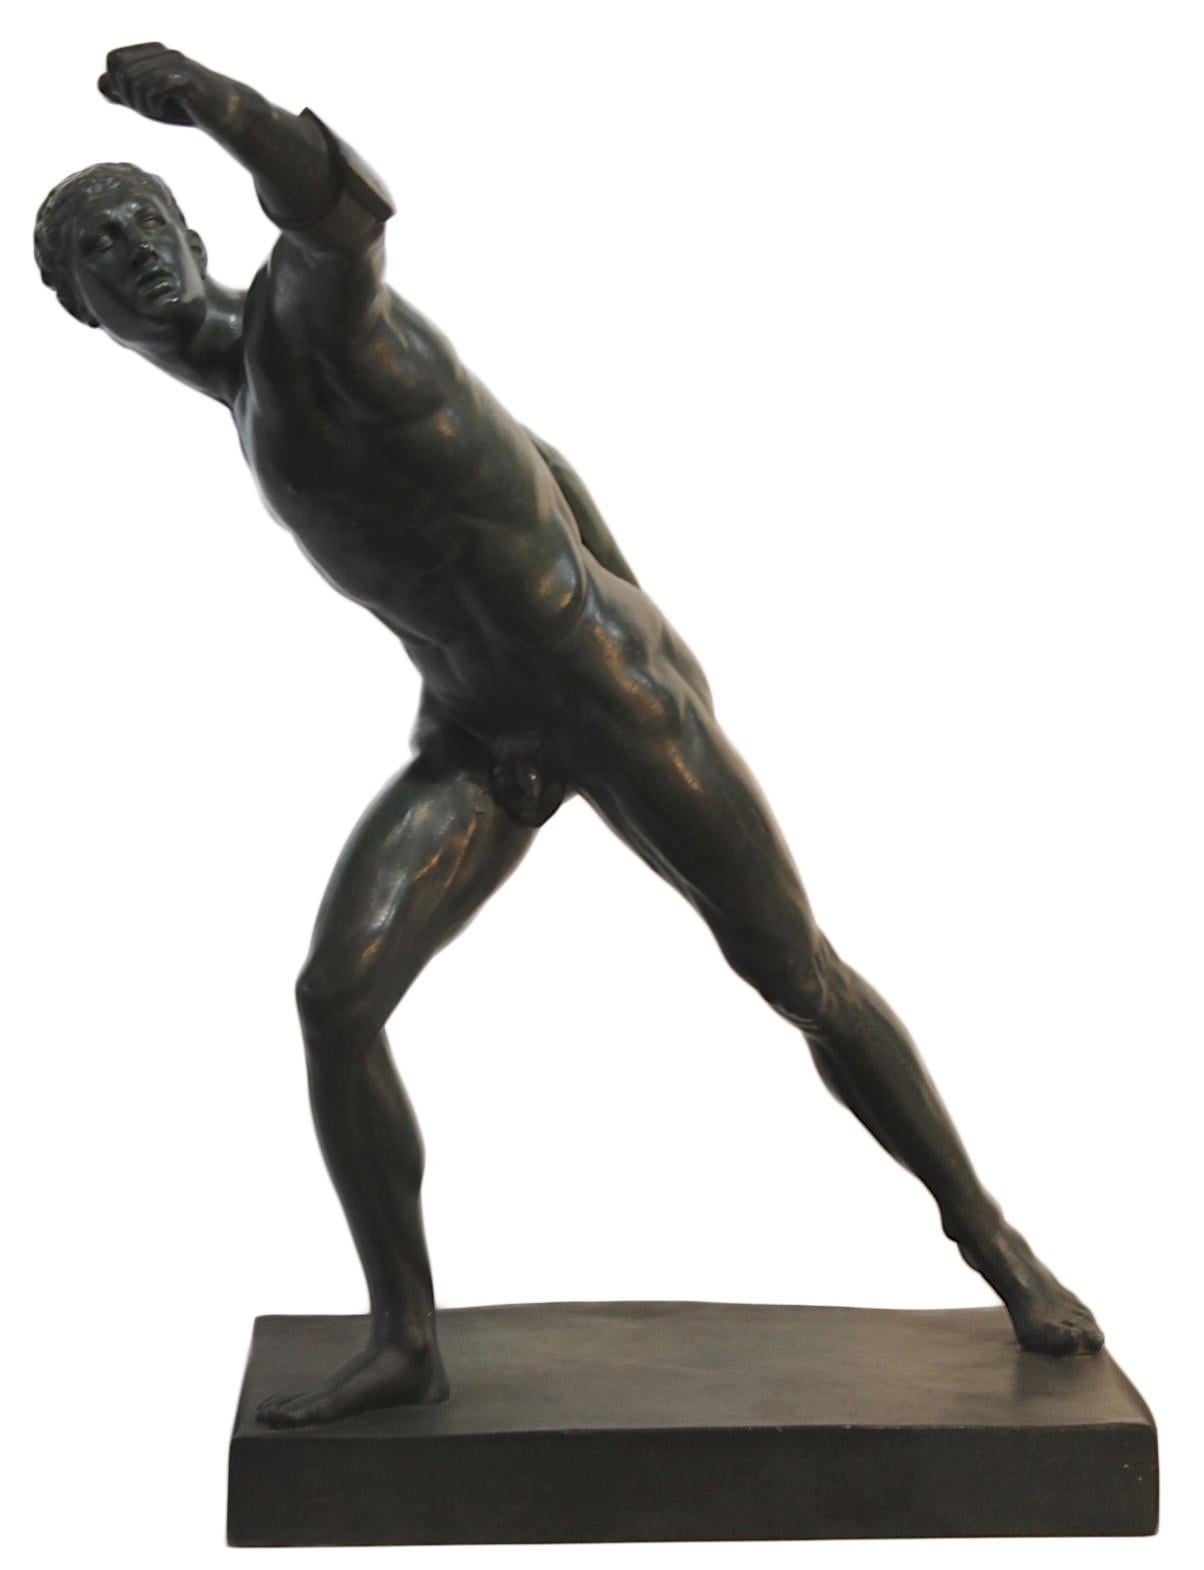 Unknown Nude Sculpture - Early 19th Century Italian School Bronze, The Borghese Gladiator, c. 1810